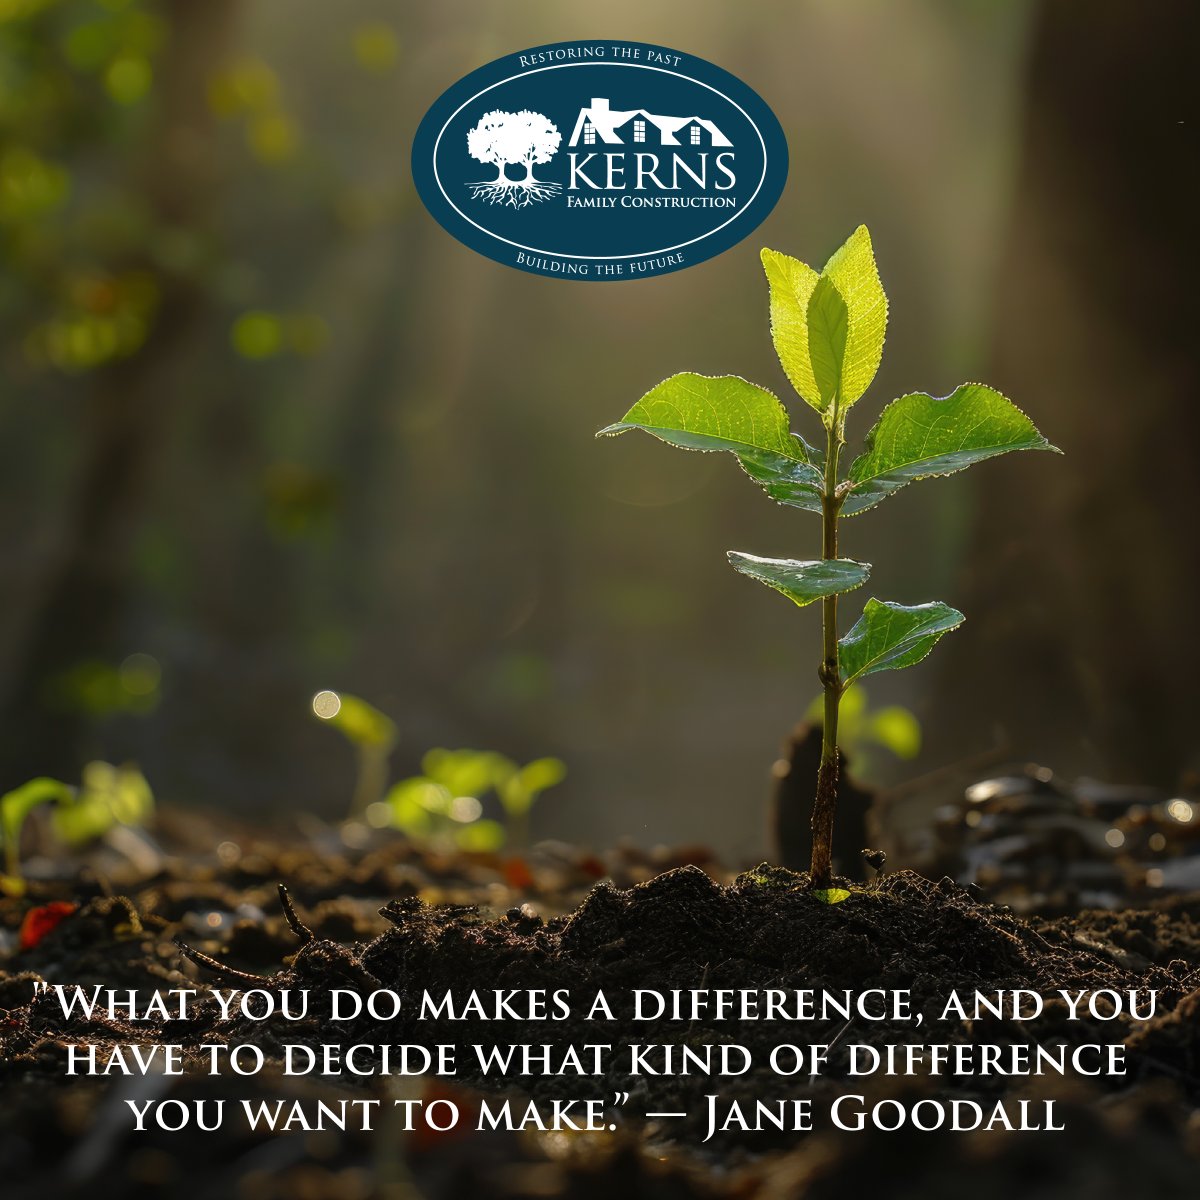 'What you do makes a difference, and you have to decide what kind of difference you want to make.” — Jane Goodall 😀🌳🌱🌷🌍🌦❤️ Happy Earth Day!

#historicpreservation #restoration #kernsfamilyconstruction #thisplacematters #zephyrhills #pascocountyfl #jellyfishlighting